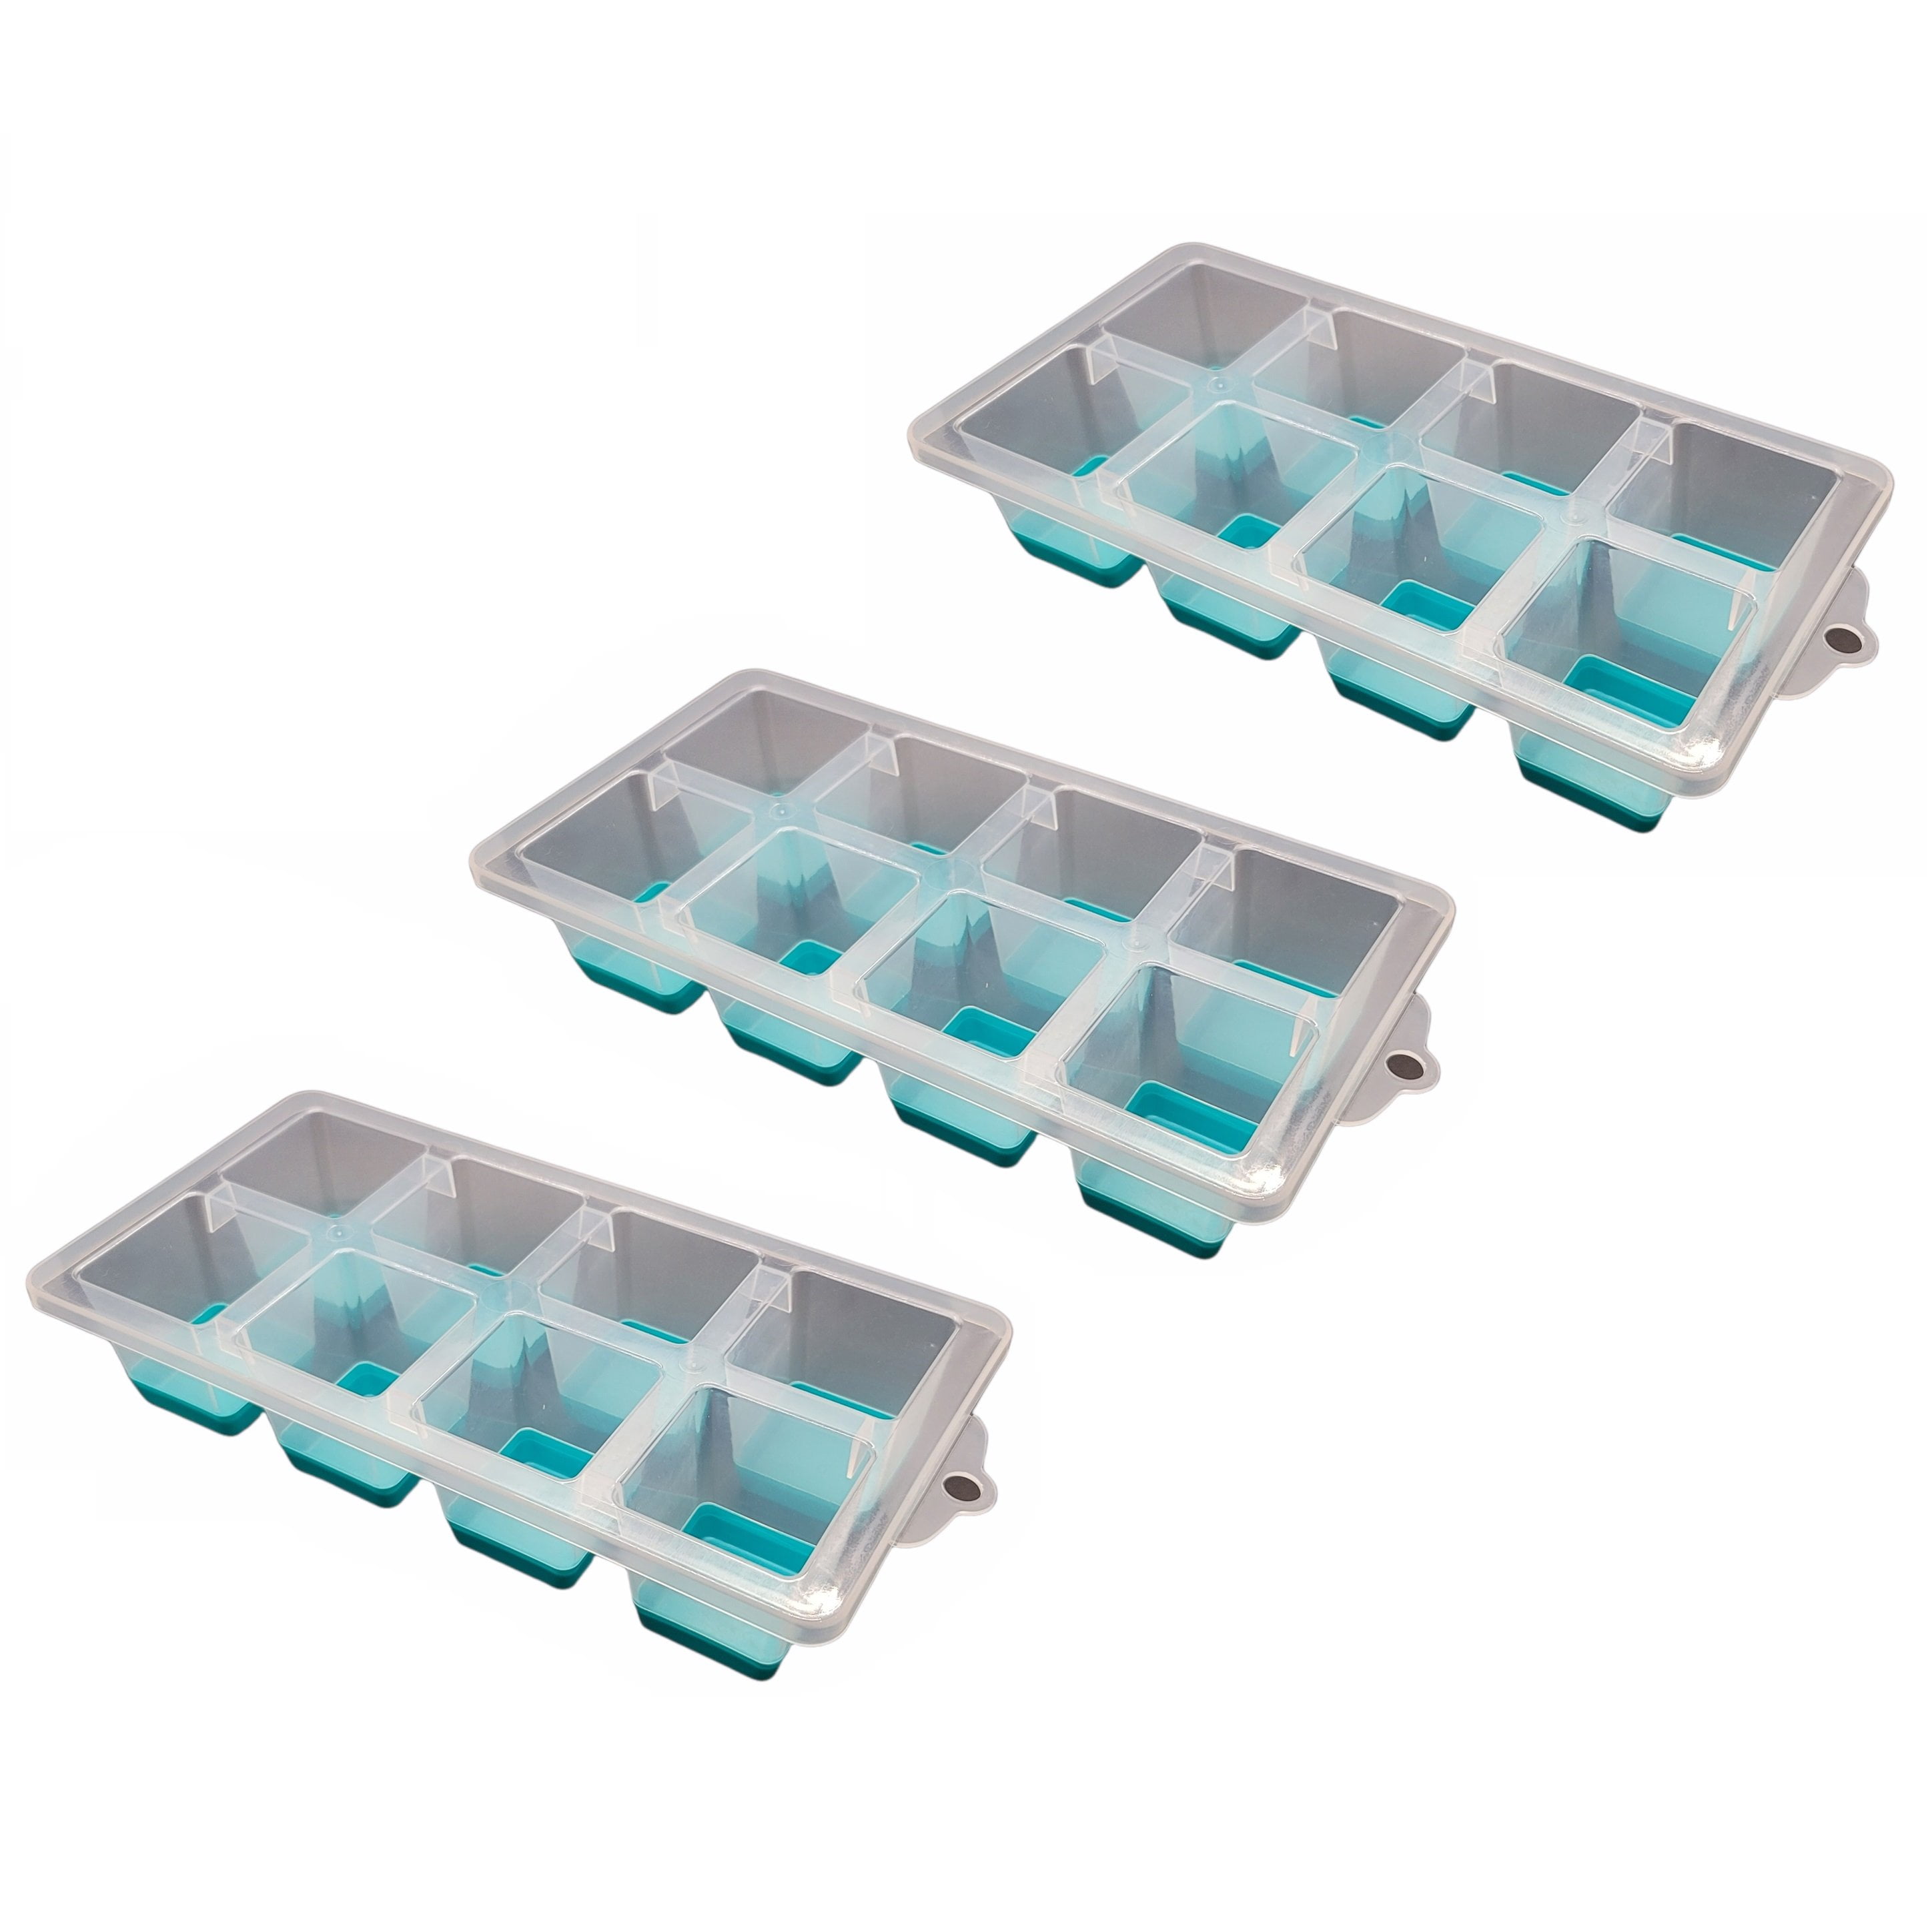 This Double-Layer Ice Cube Bin from Hubee Is a Small-Space Game